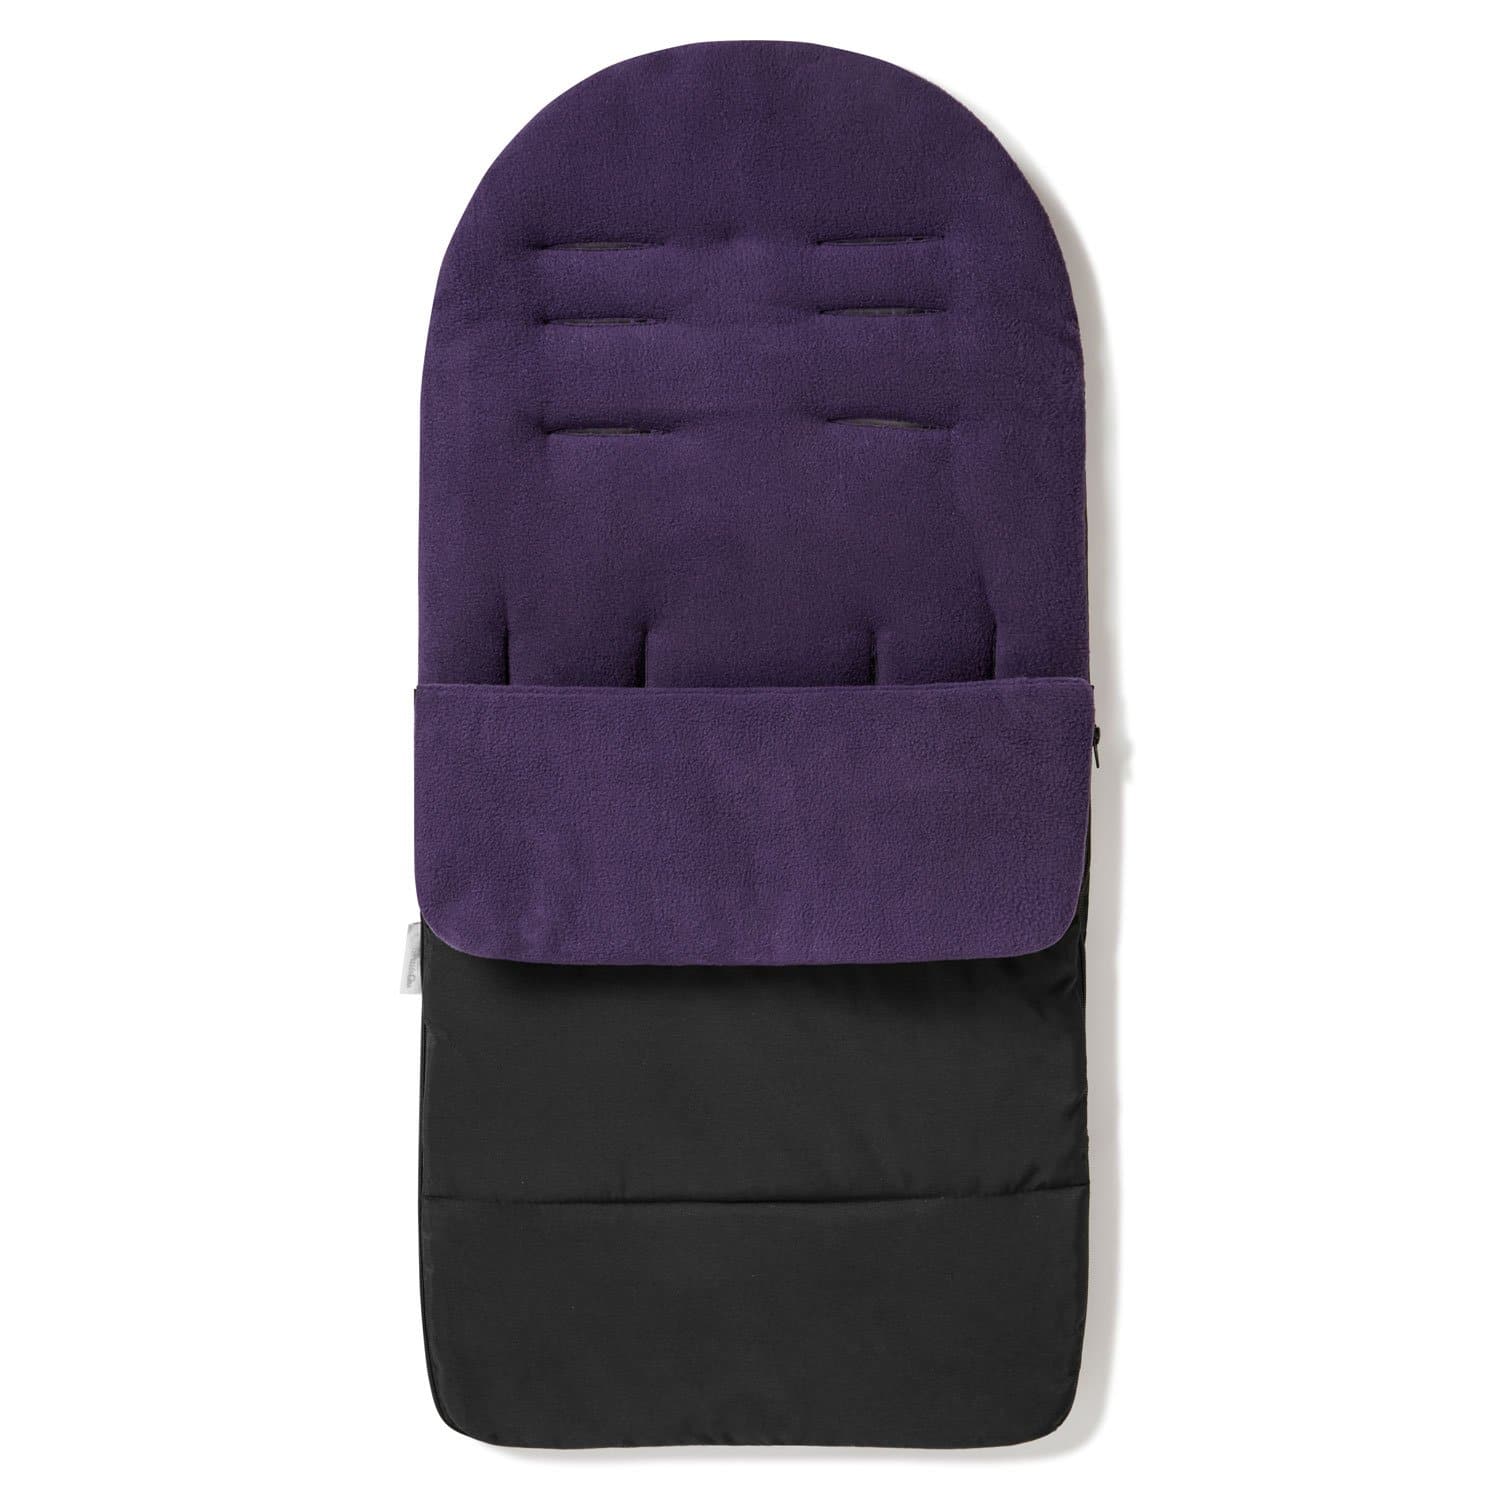 Premium Footmuff / Cosy Toes Compatible with Quax - Plum Purple / Fits All Models | For Your Little One